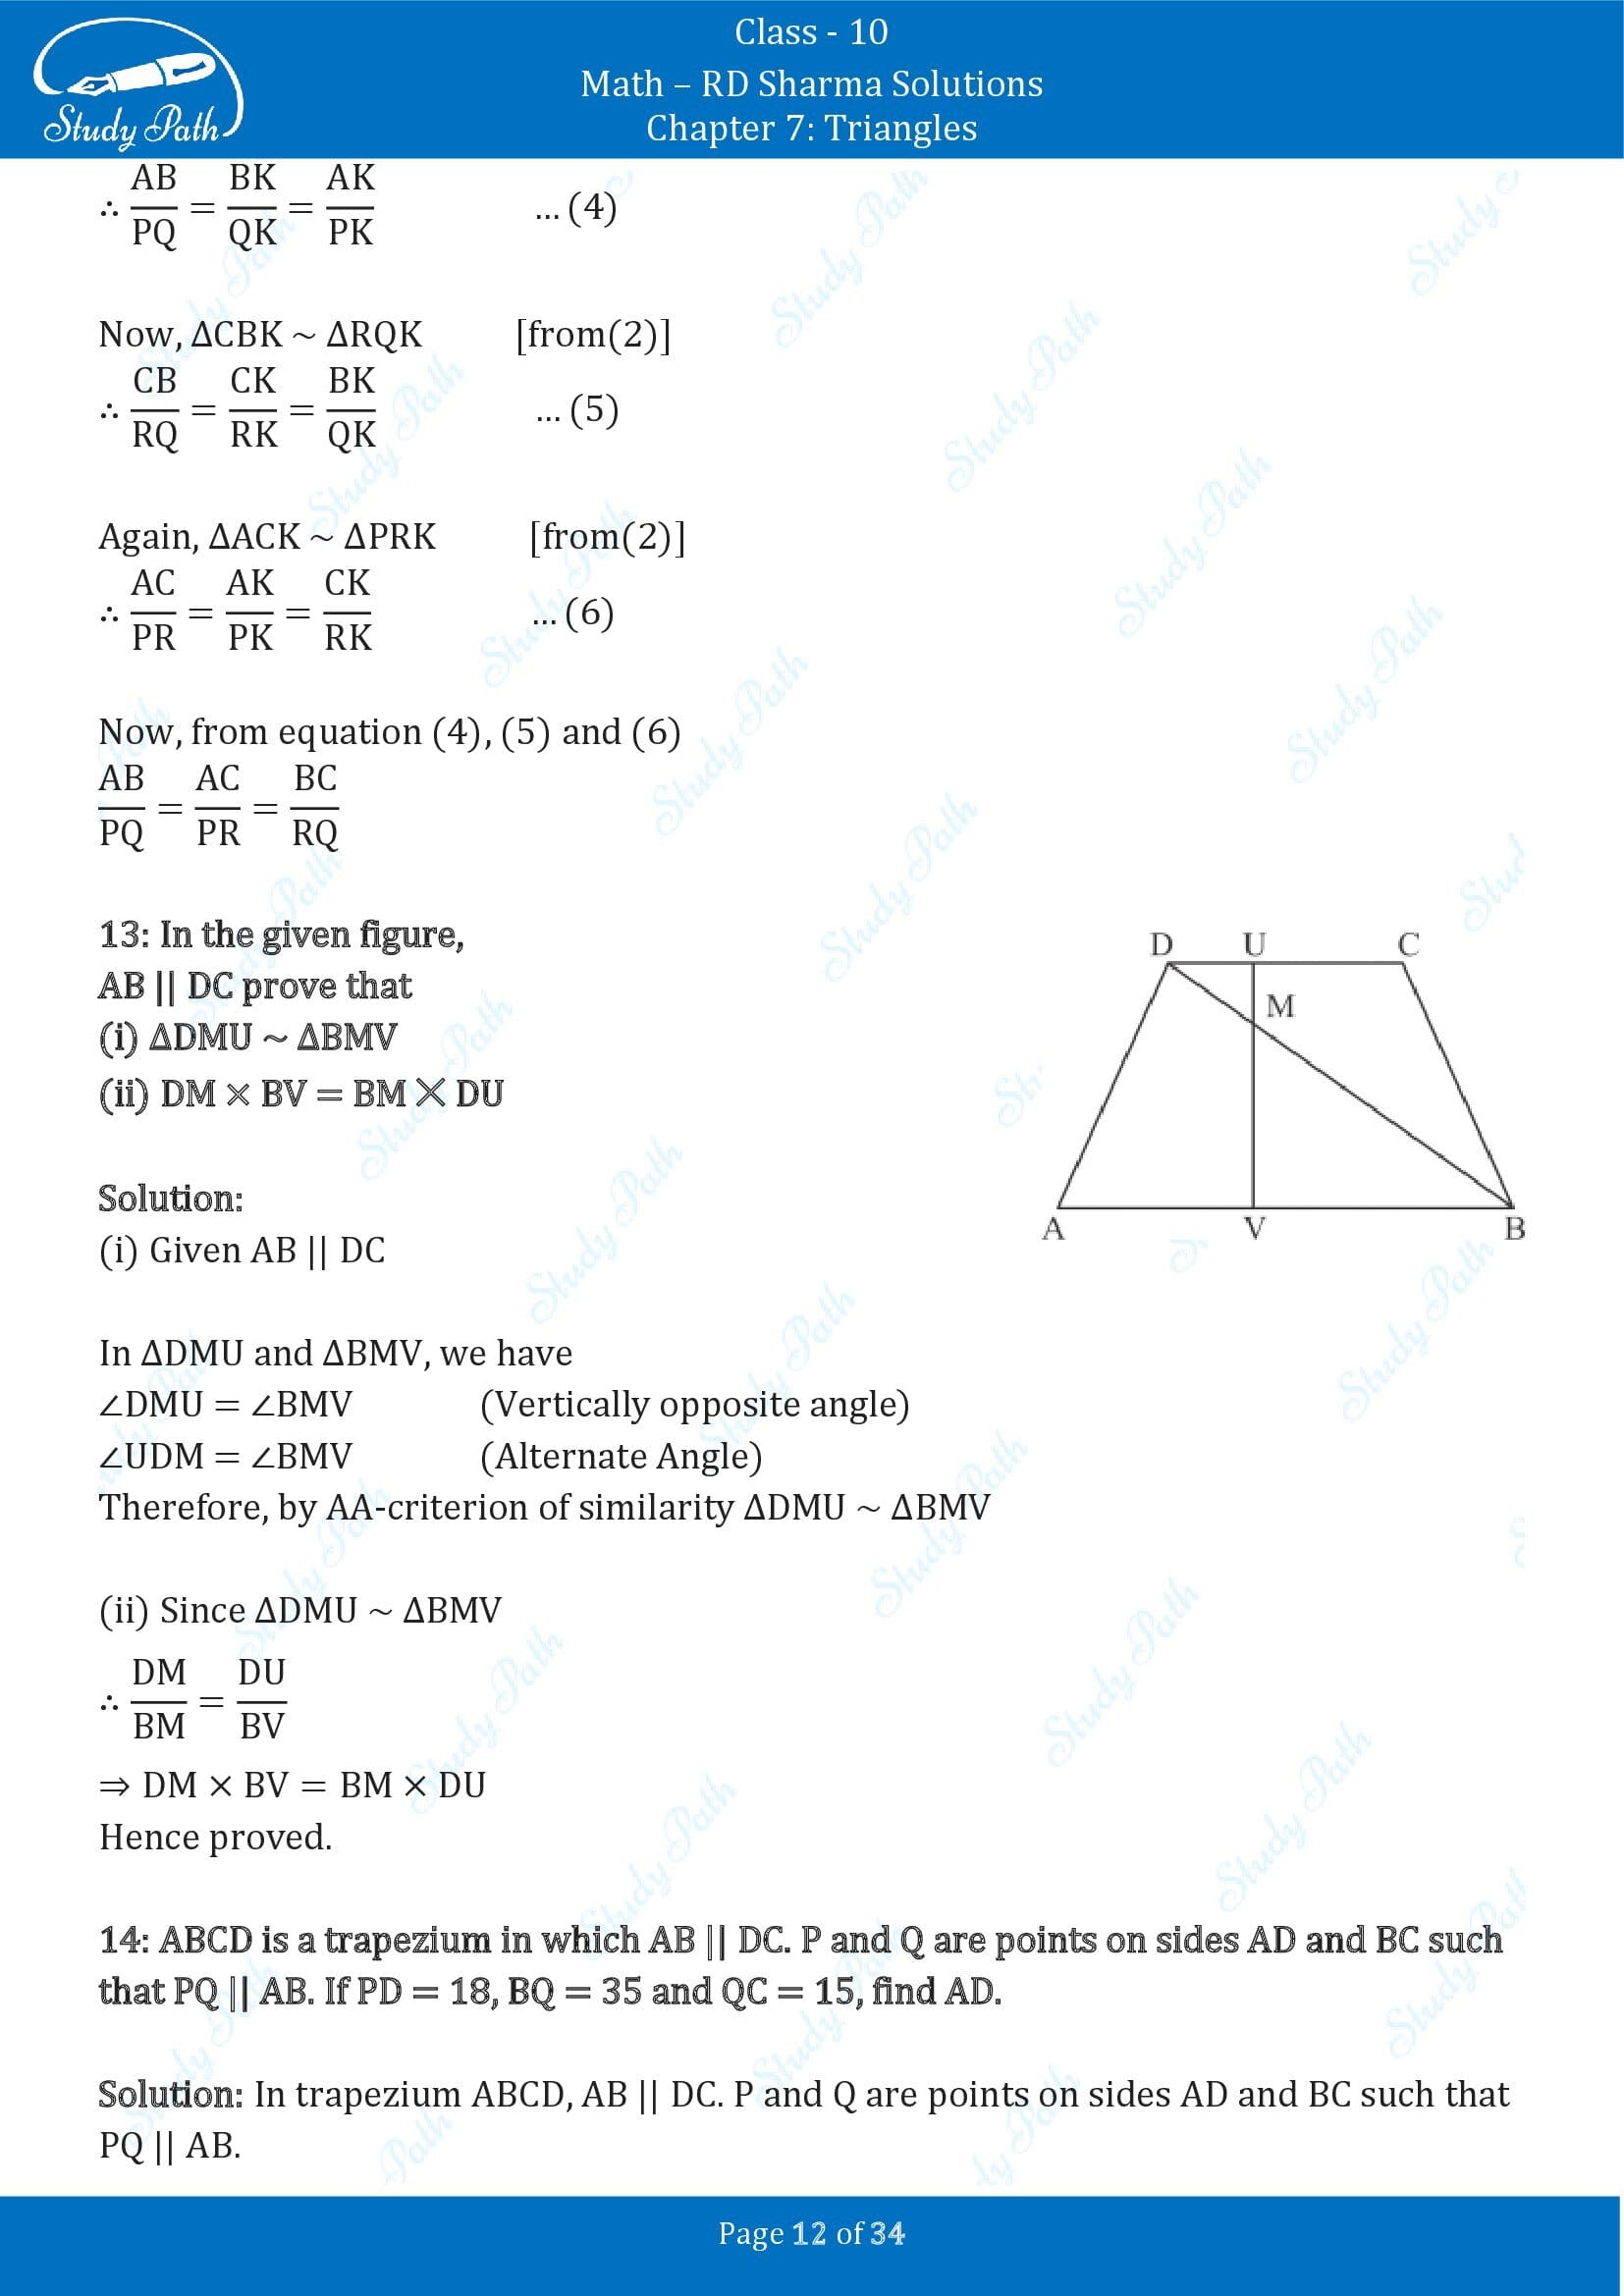 RD Sharma Solutions Class 10 Chapter 7 Triangles Revision